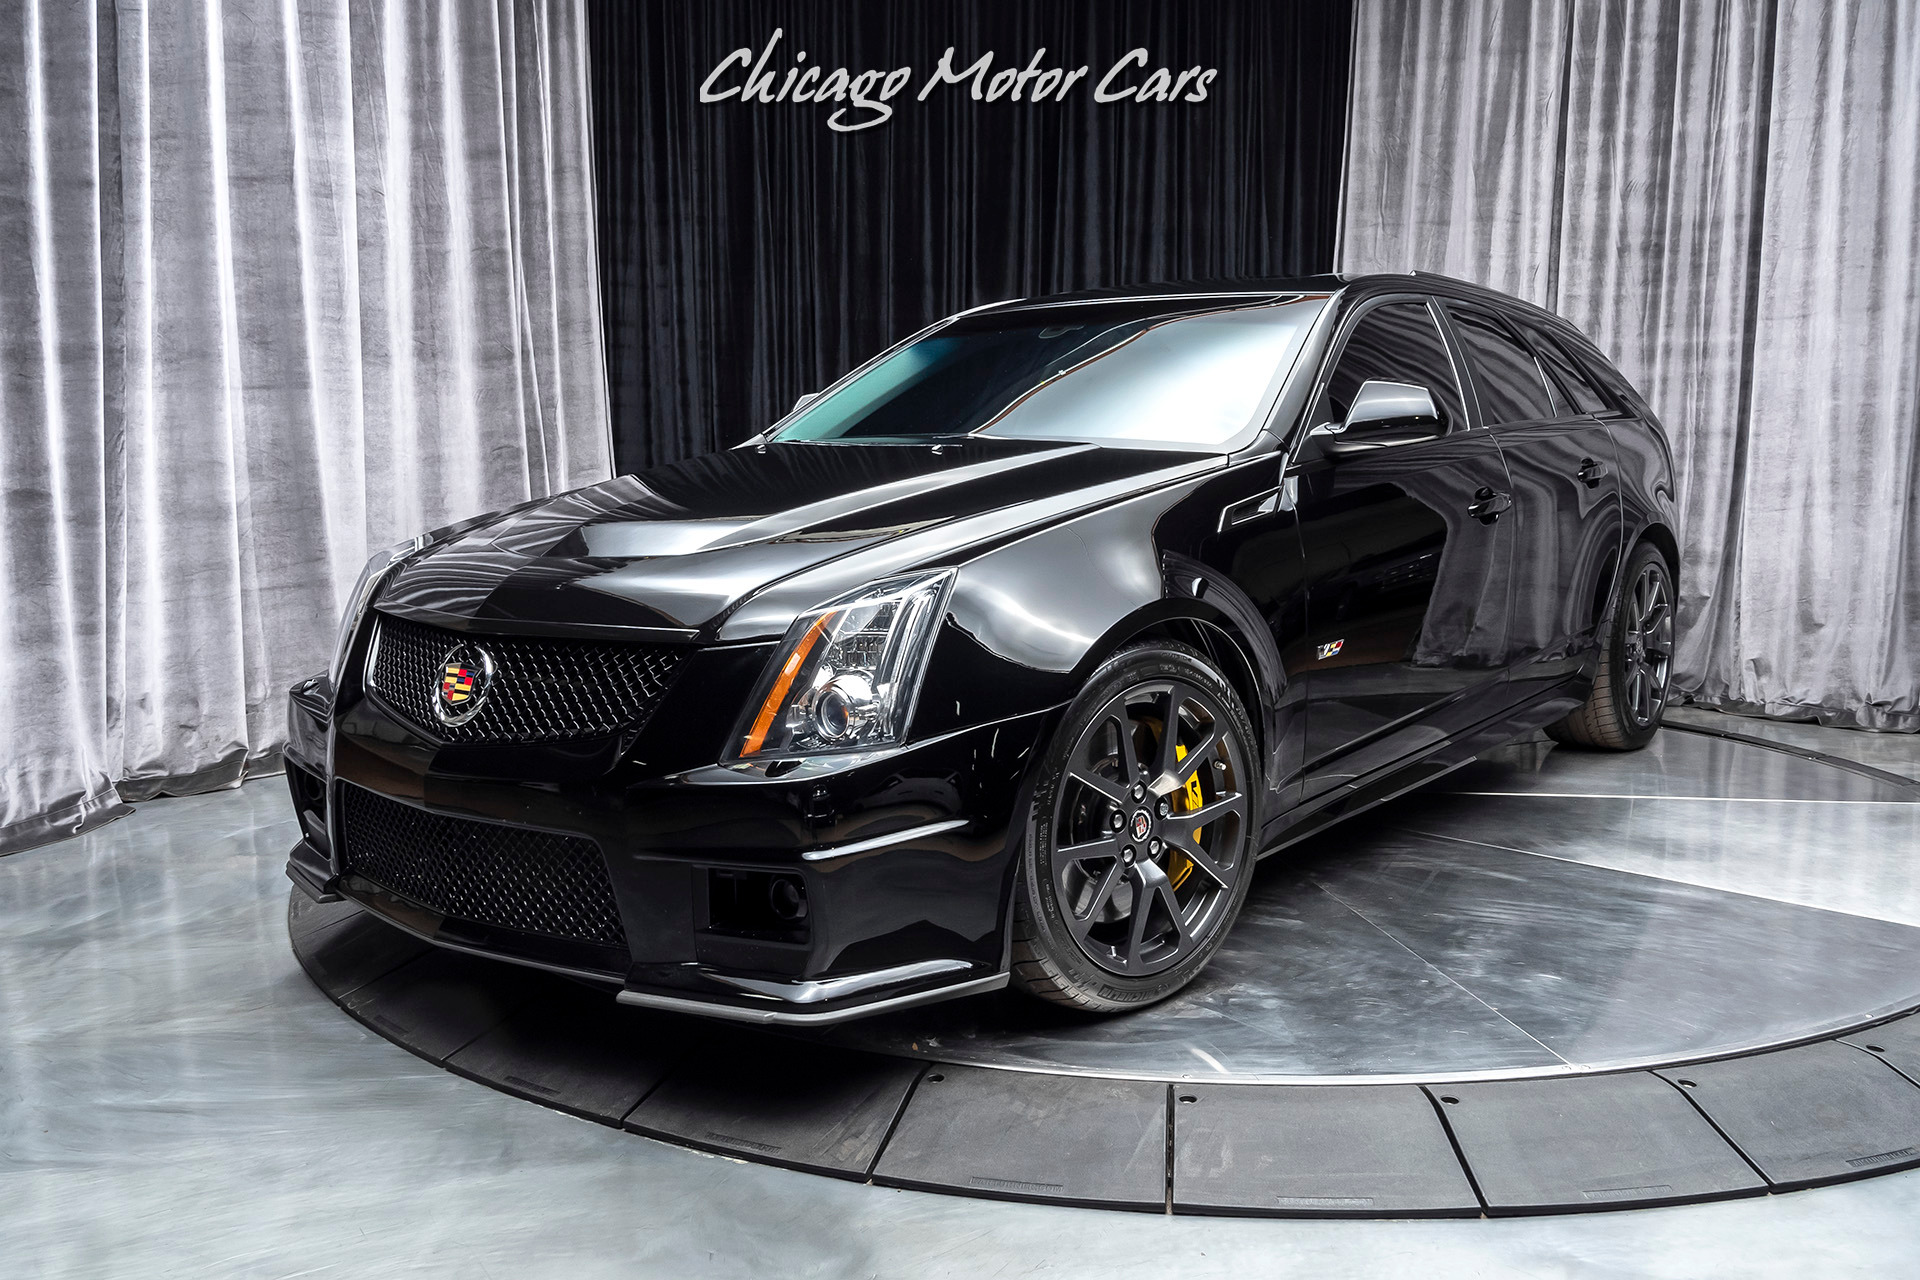 Cts-v sport trifecta betting bitcoin for usd